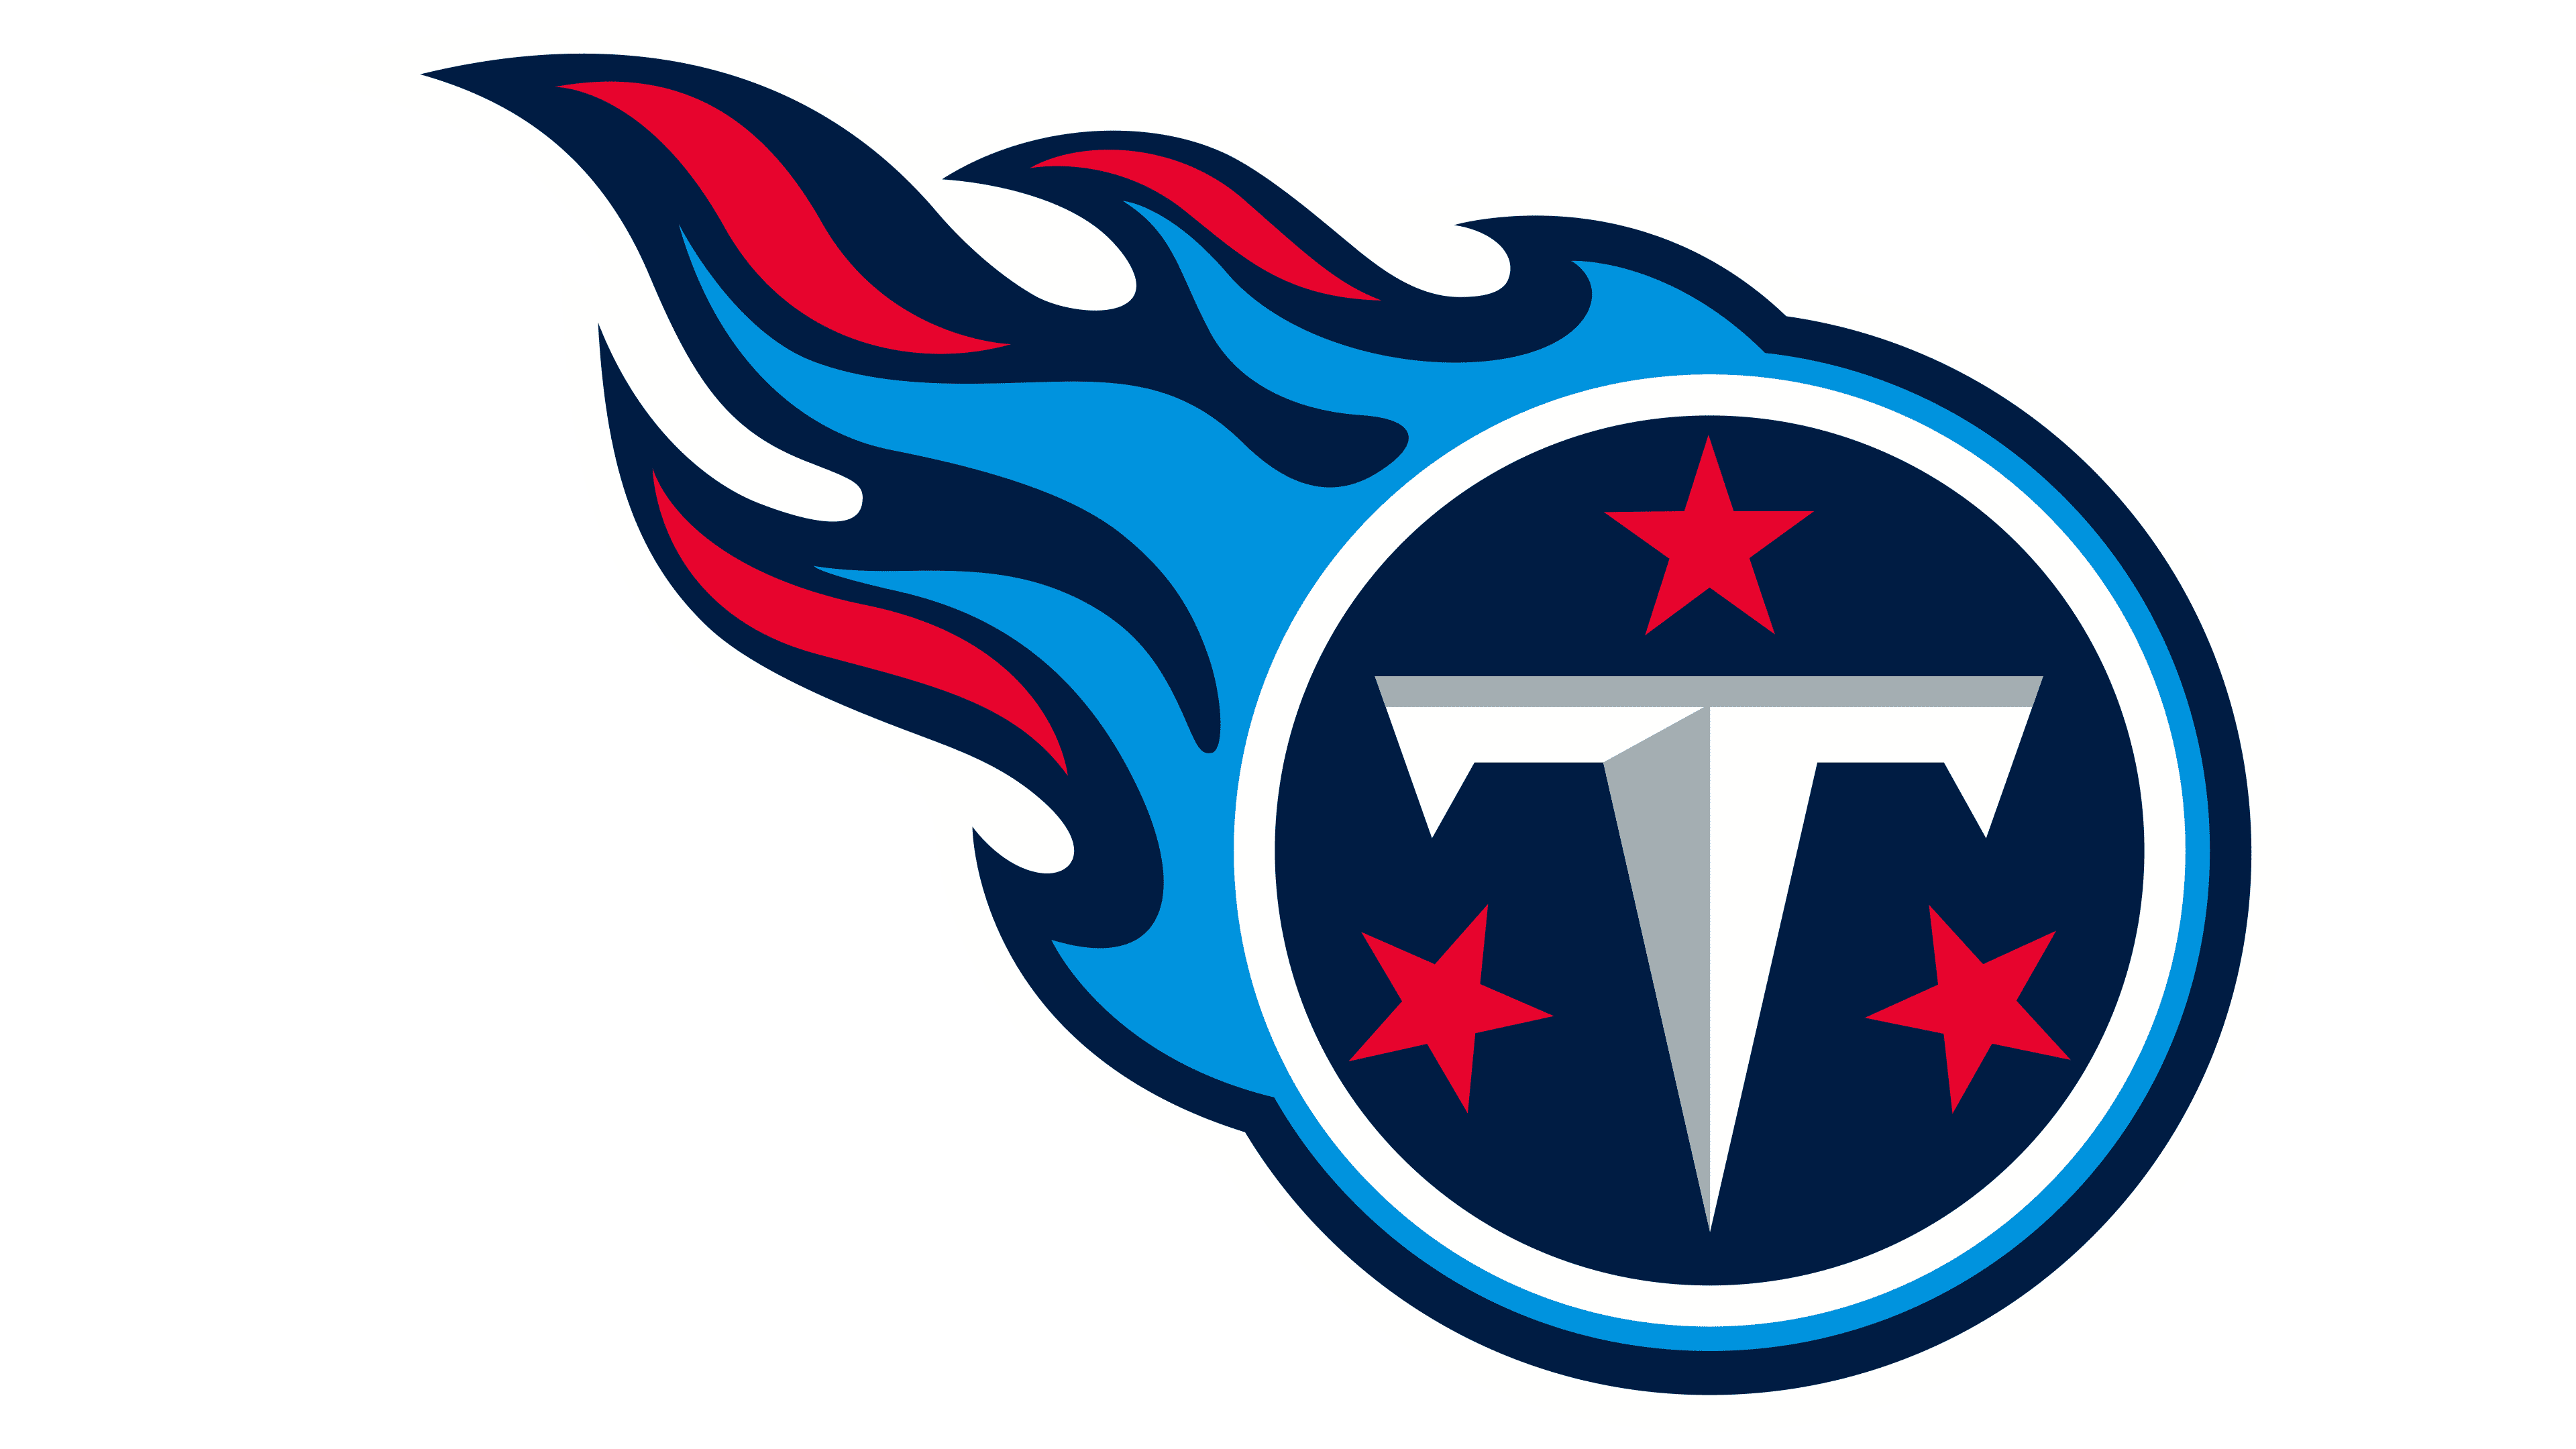 Tennessee Titans Logo | The most famous brands and company logos in the  world